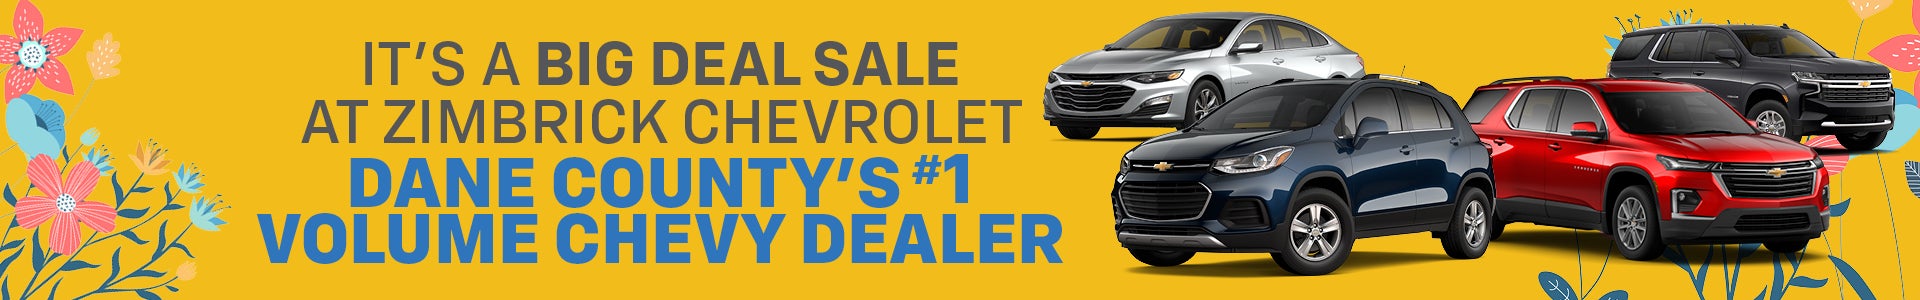 A big deal sale at Zimbrick Chevrolet the county